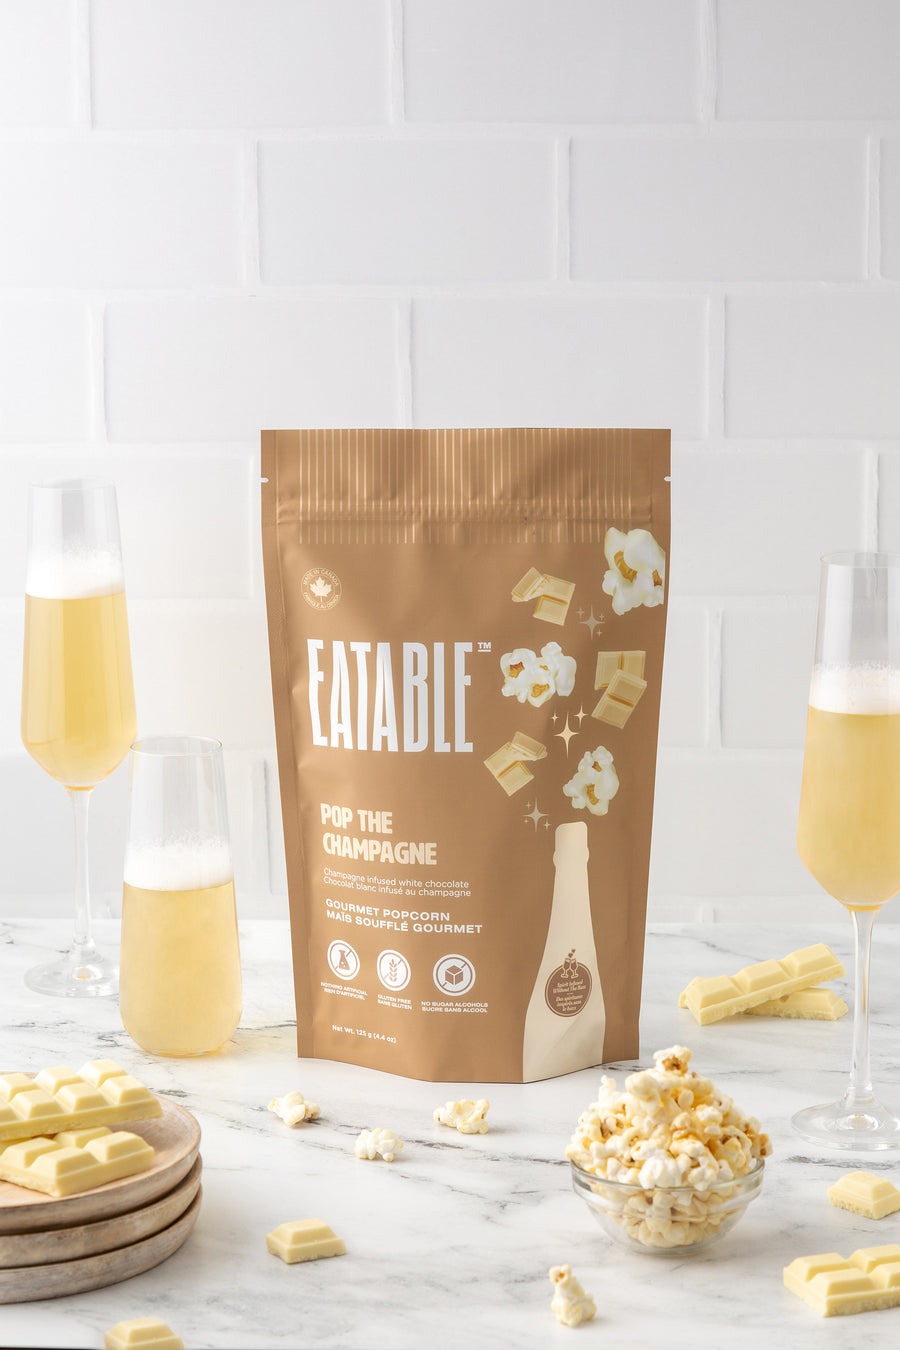 Pop the Champagne - Wine Infused White Chocolate Kettle Corn - EATABLE Popcorn